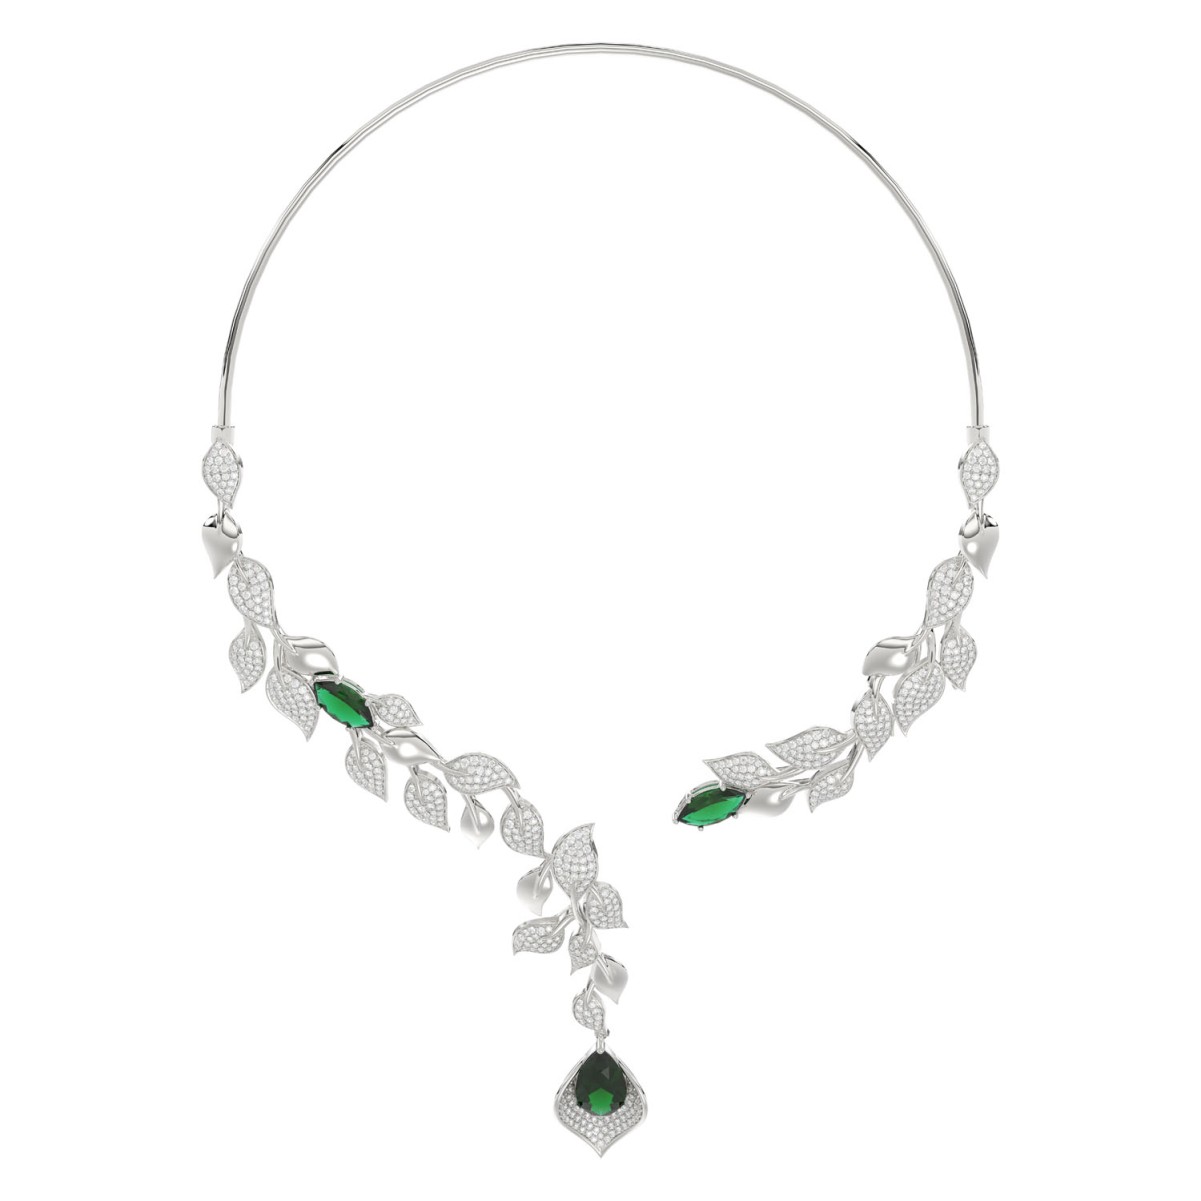 18K WHITE GOLD 11 3/4CT ROUND/PEAR/MARQUISE DIAMOND LADIES NECKLACE(COLOR STONE GREEN EMERALD PEAR DIAMOND 4 1/6CT/MARQUISE DIAMOND 3 5/8CT)